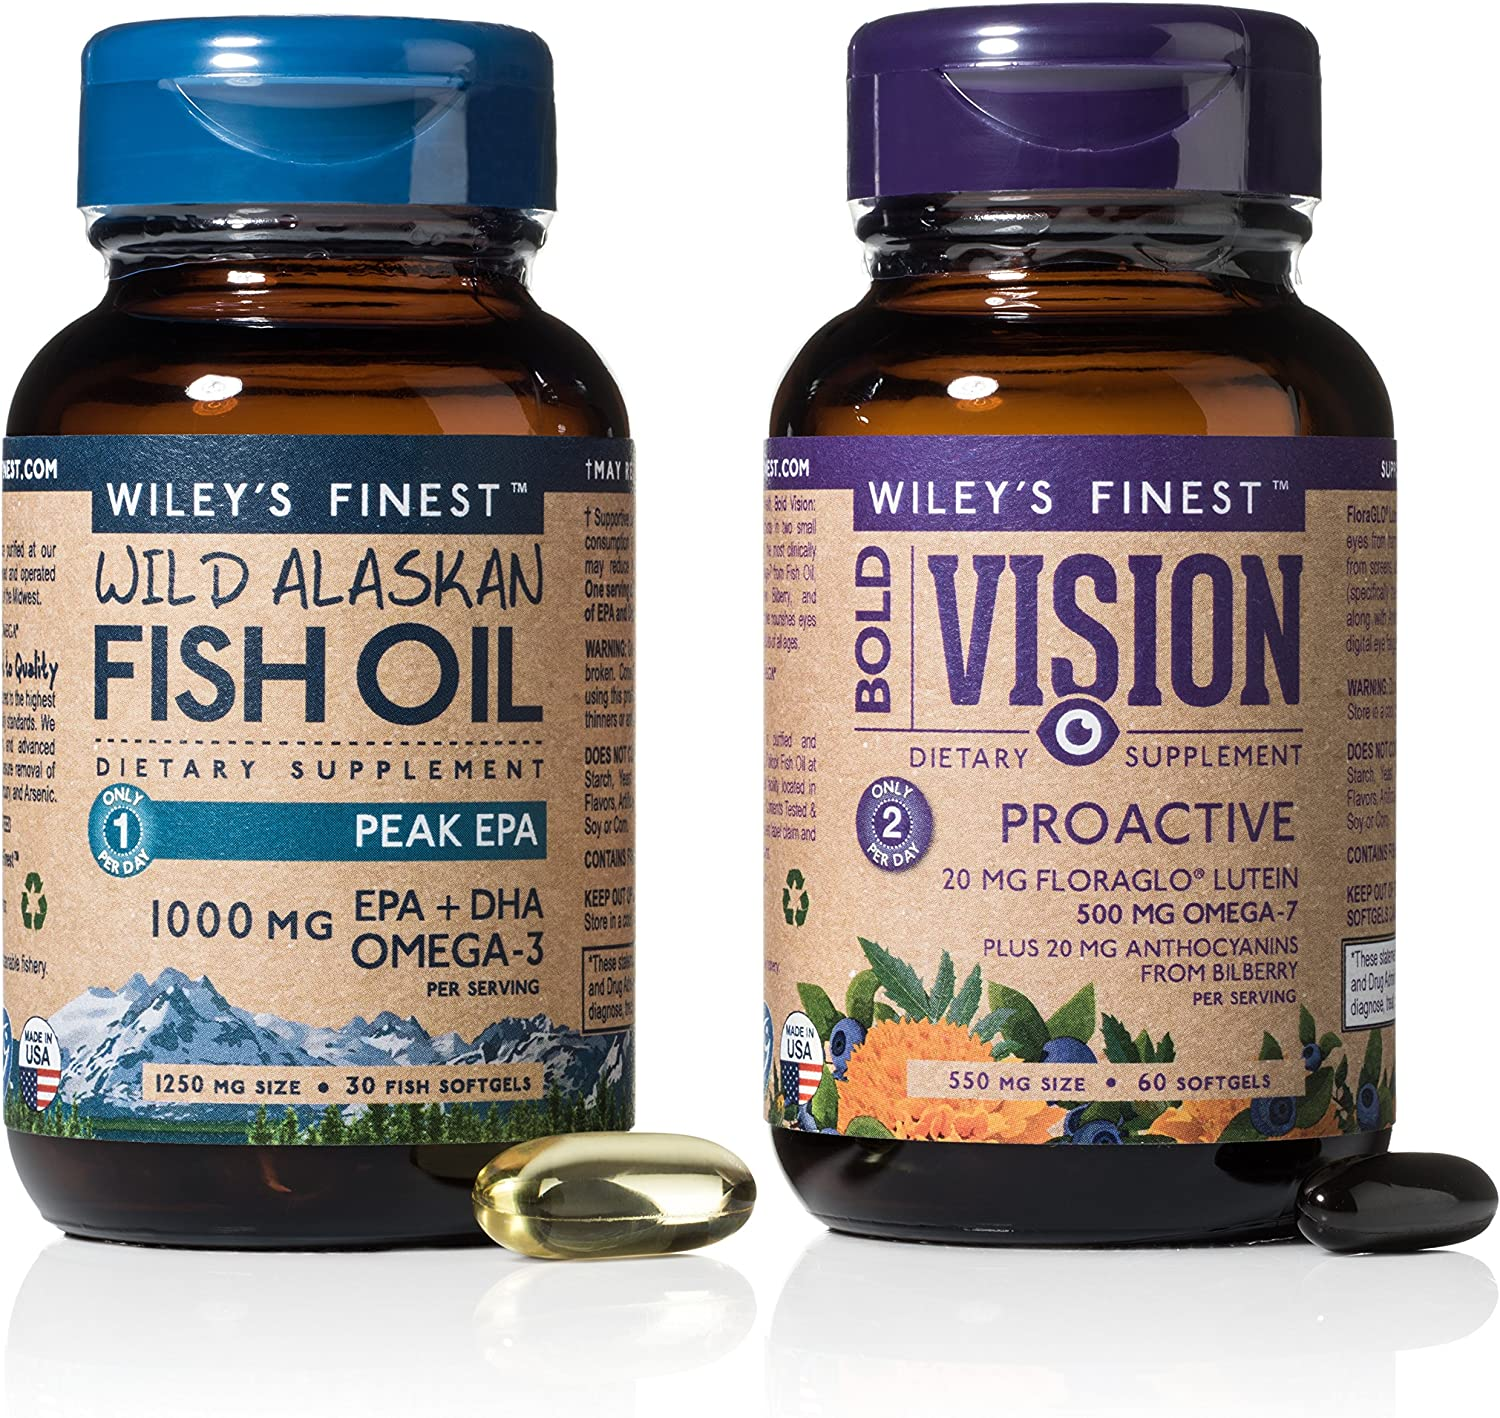 Wild Alaskan Fish Oil - Bold Vision for Eye Health, with Lutein, Zeaxanthin, Bilberry, Omega-7, Astaxanthin plus Vitamin E and Zinc, 60 Softgels